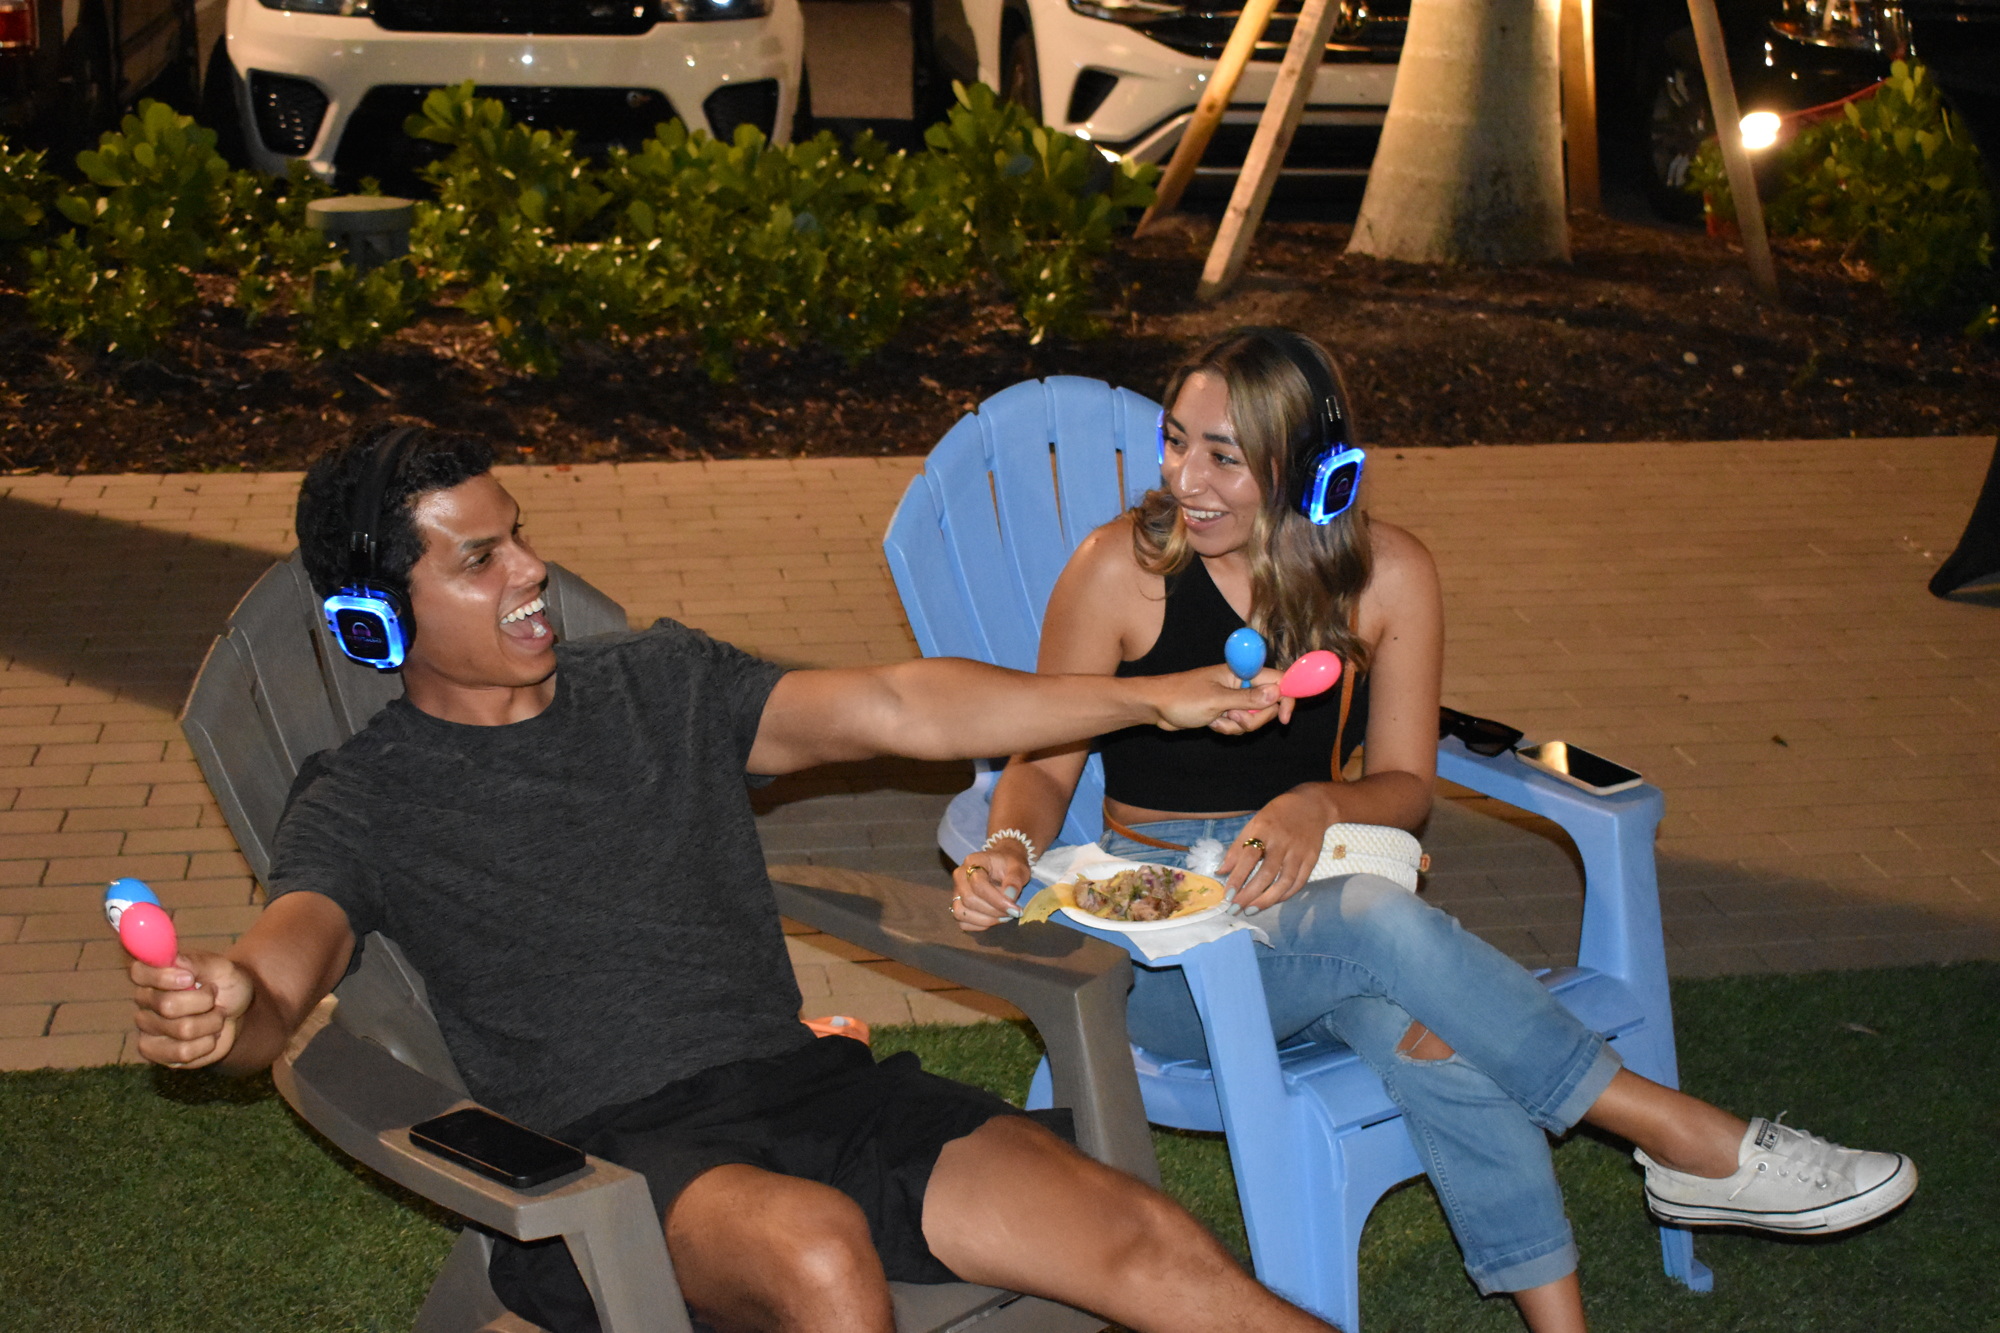 Lakewood Ranch's Gabriel Meneses and girlfriend Laura Gomez relax with tacos and maracas.